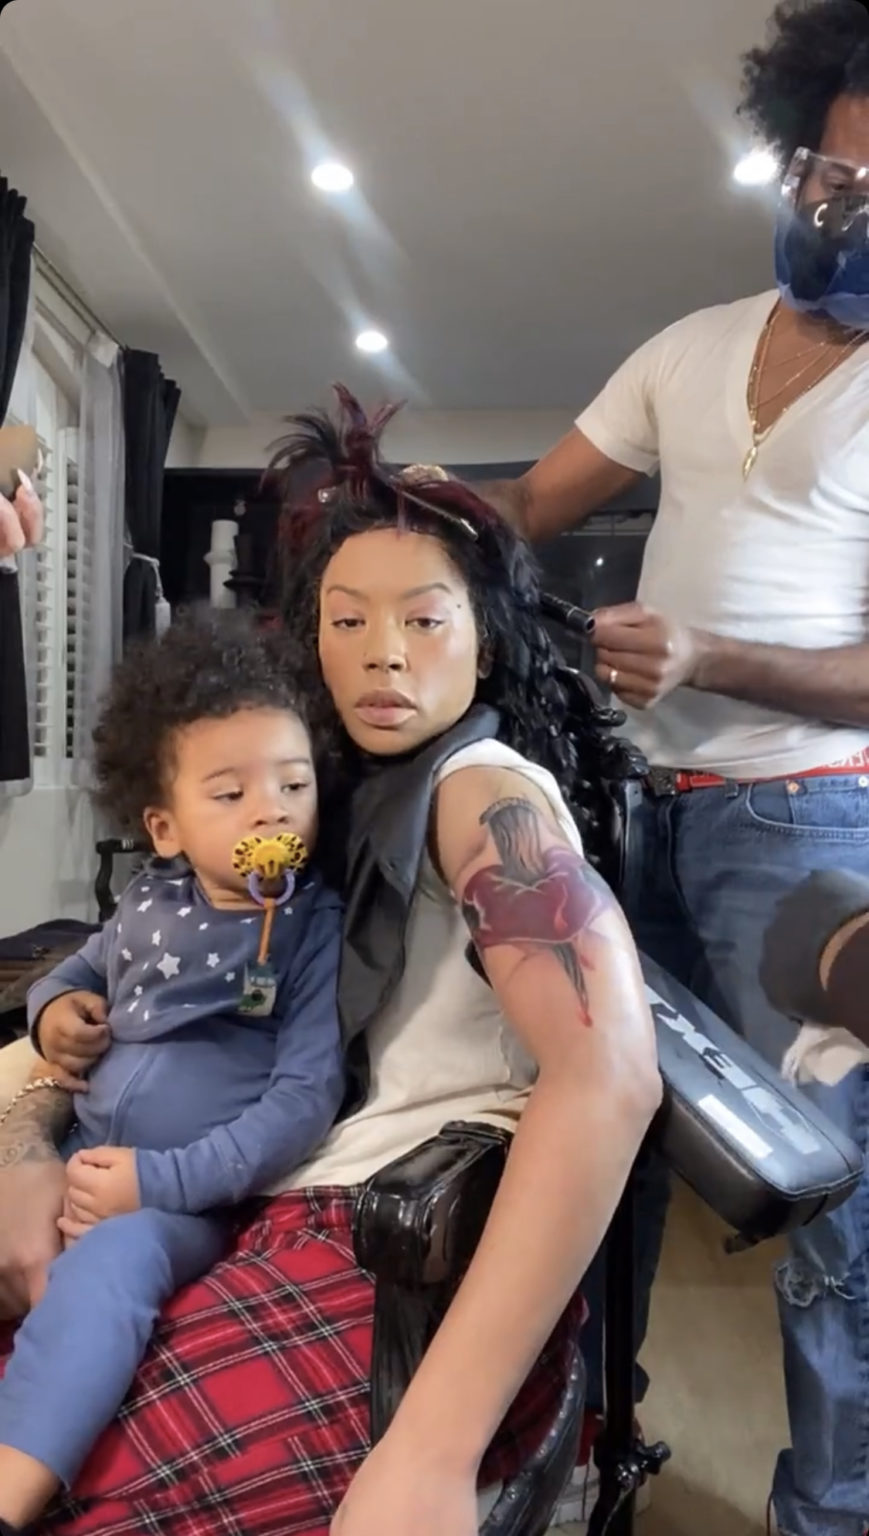 ‘That Tattoo Couldn’t Wait?’: Keyshia Cole Shows Her Getting a Tattoo